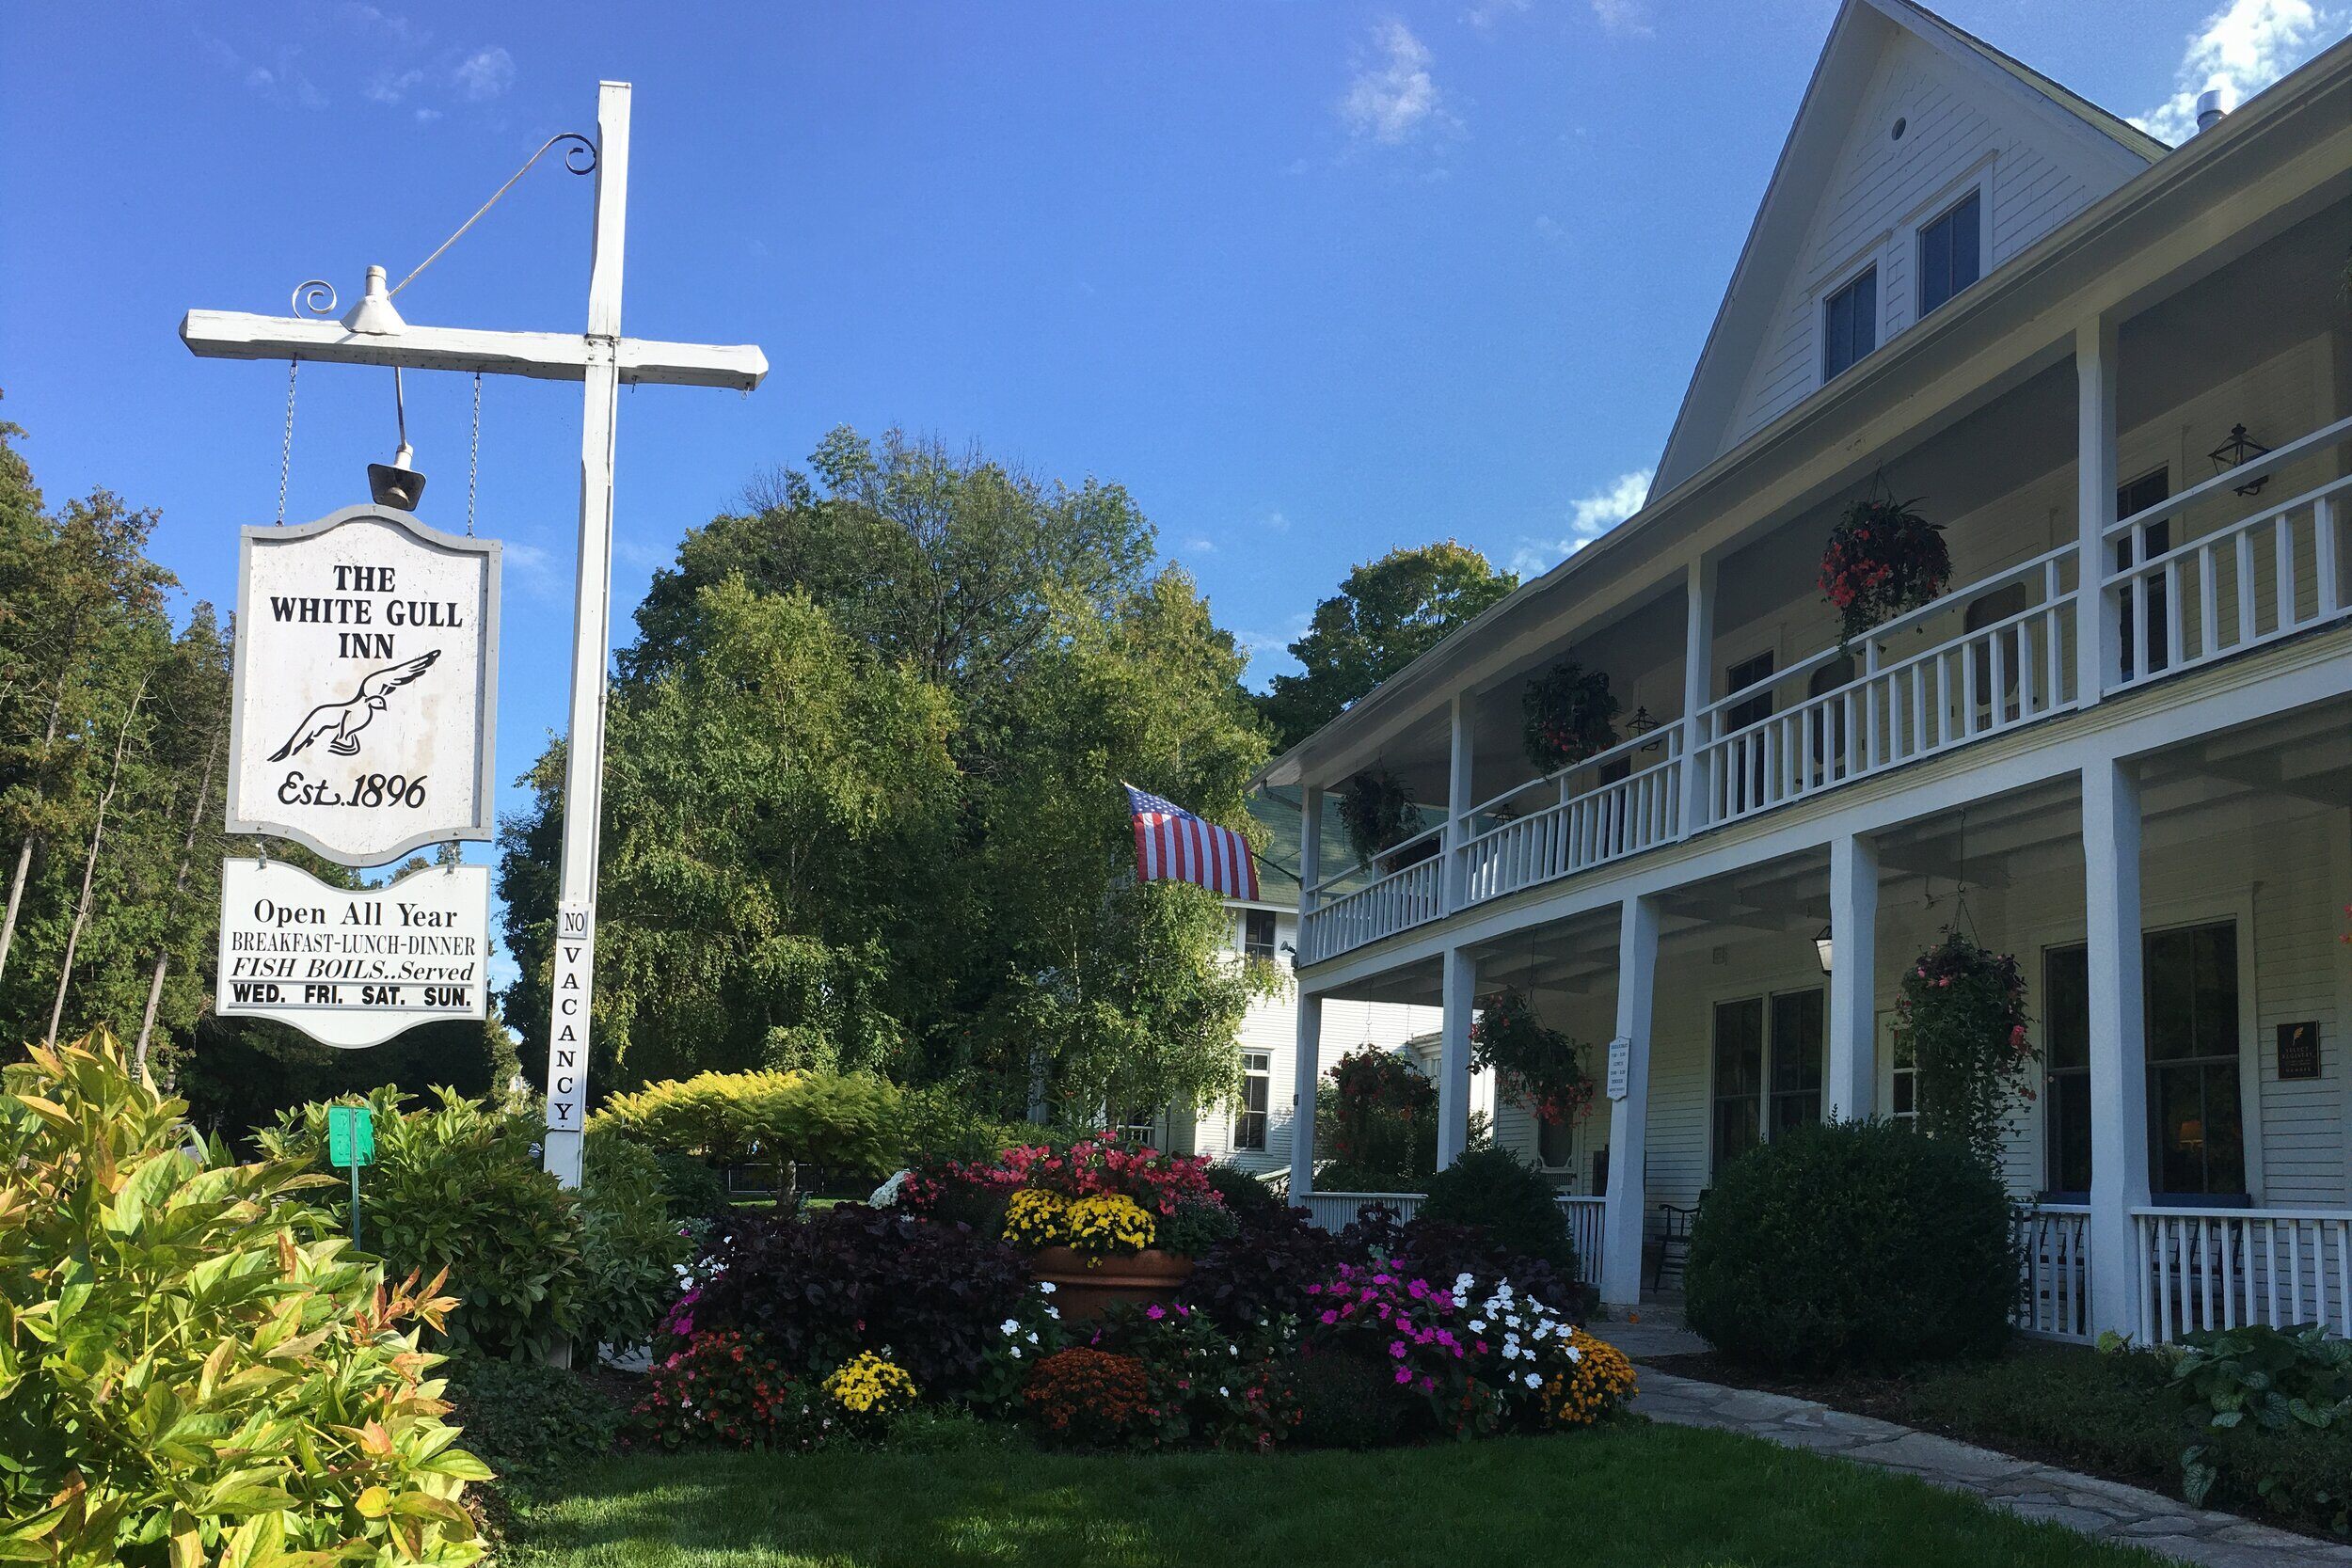 The front entrance of the White Gull Inn in Door County, Wisconsin, United States